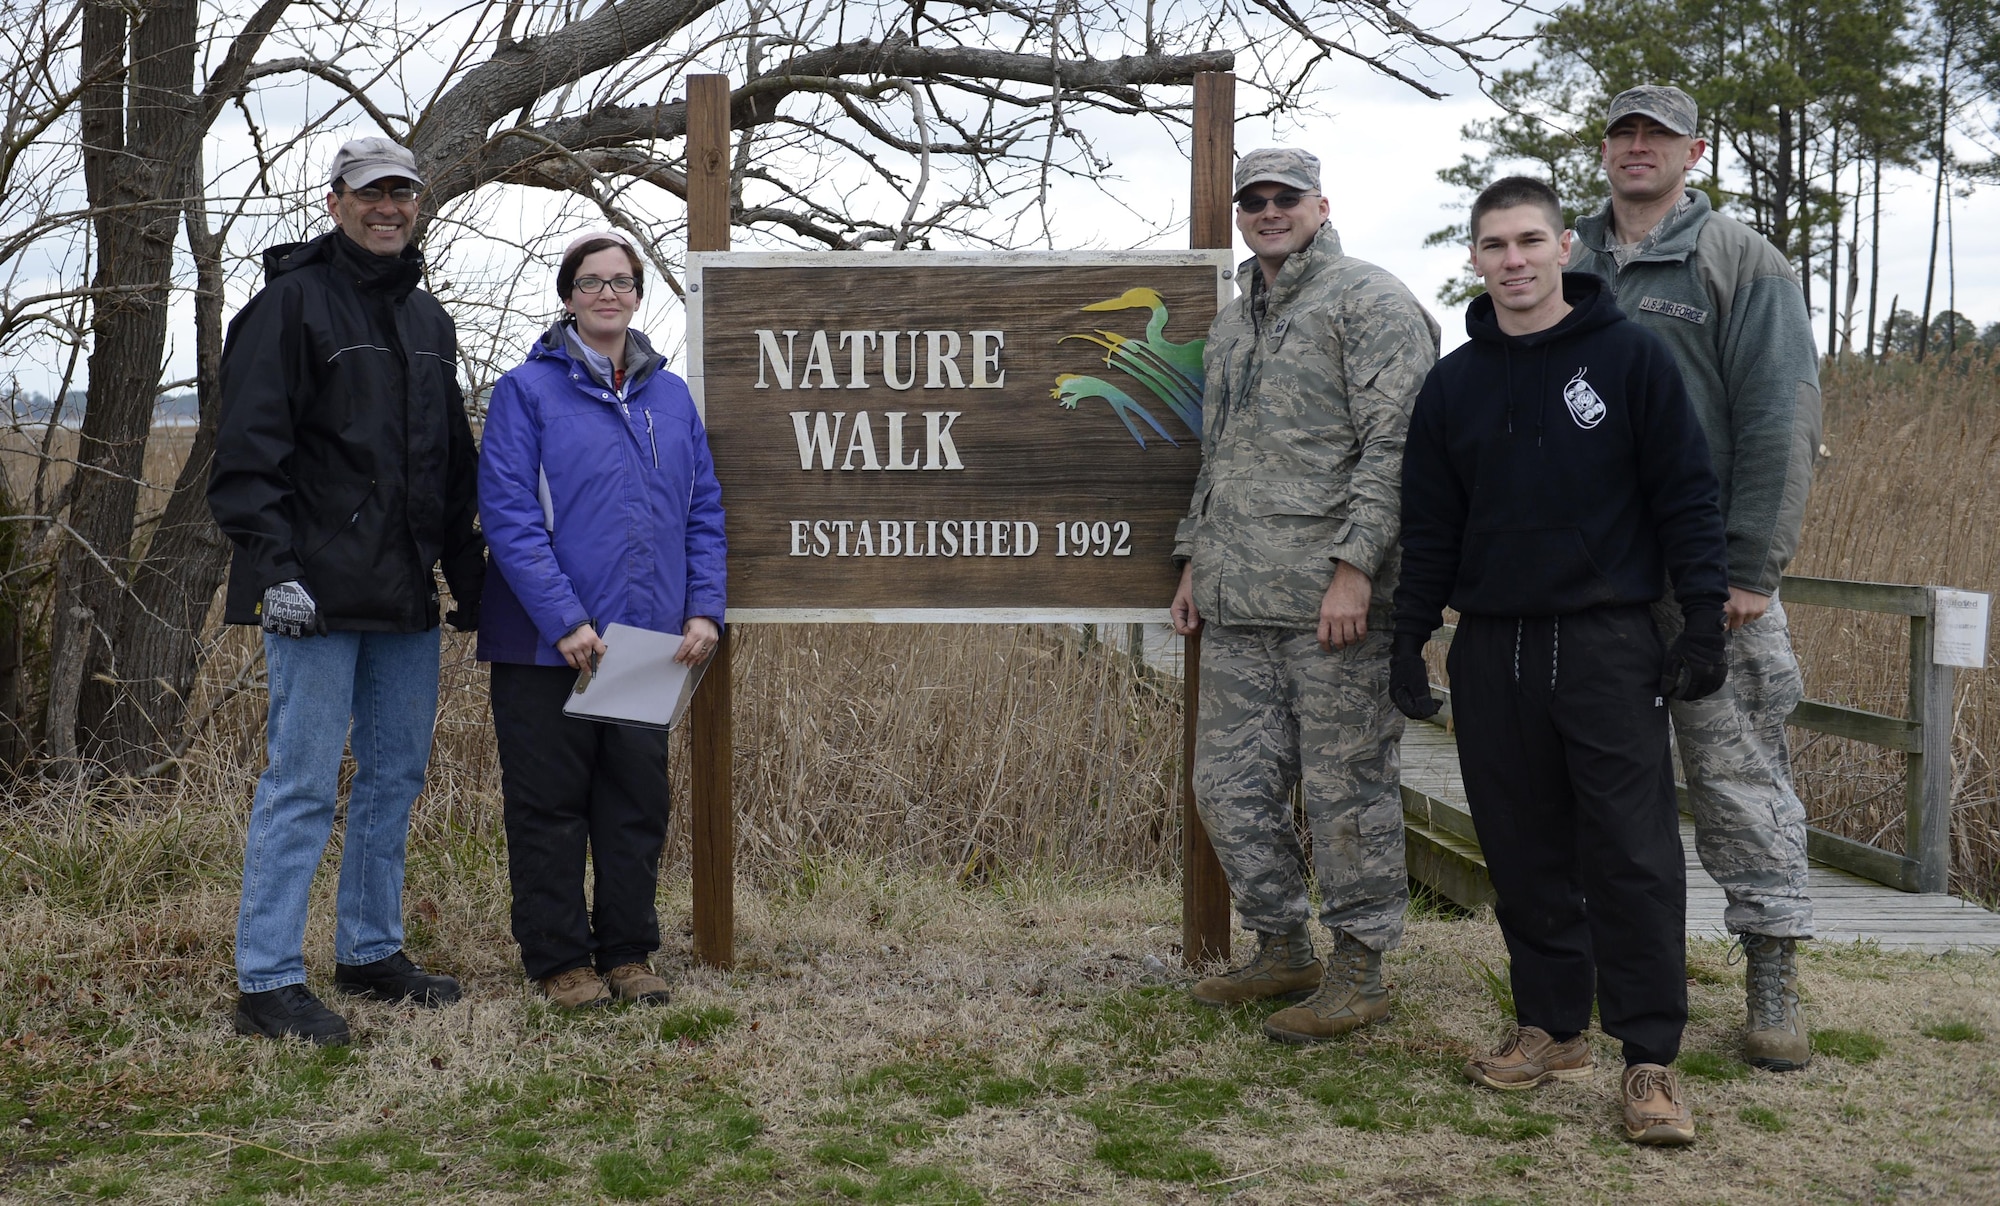 Volunteers helped relocate pollinator plants to the nature trail during a volunteer event at Joint Base Langley-Eustis, Va., Jan. 6, 2017. With volunteer support, relocating the plants from the Bethel Park Garden to the nature trail will allow the plants to better provide food and habitats to the pollinator species living in the area. (U.S. Air Force photo by Airman 1st Class Kaylee Dubois)